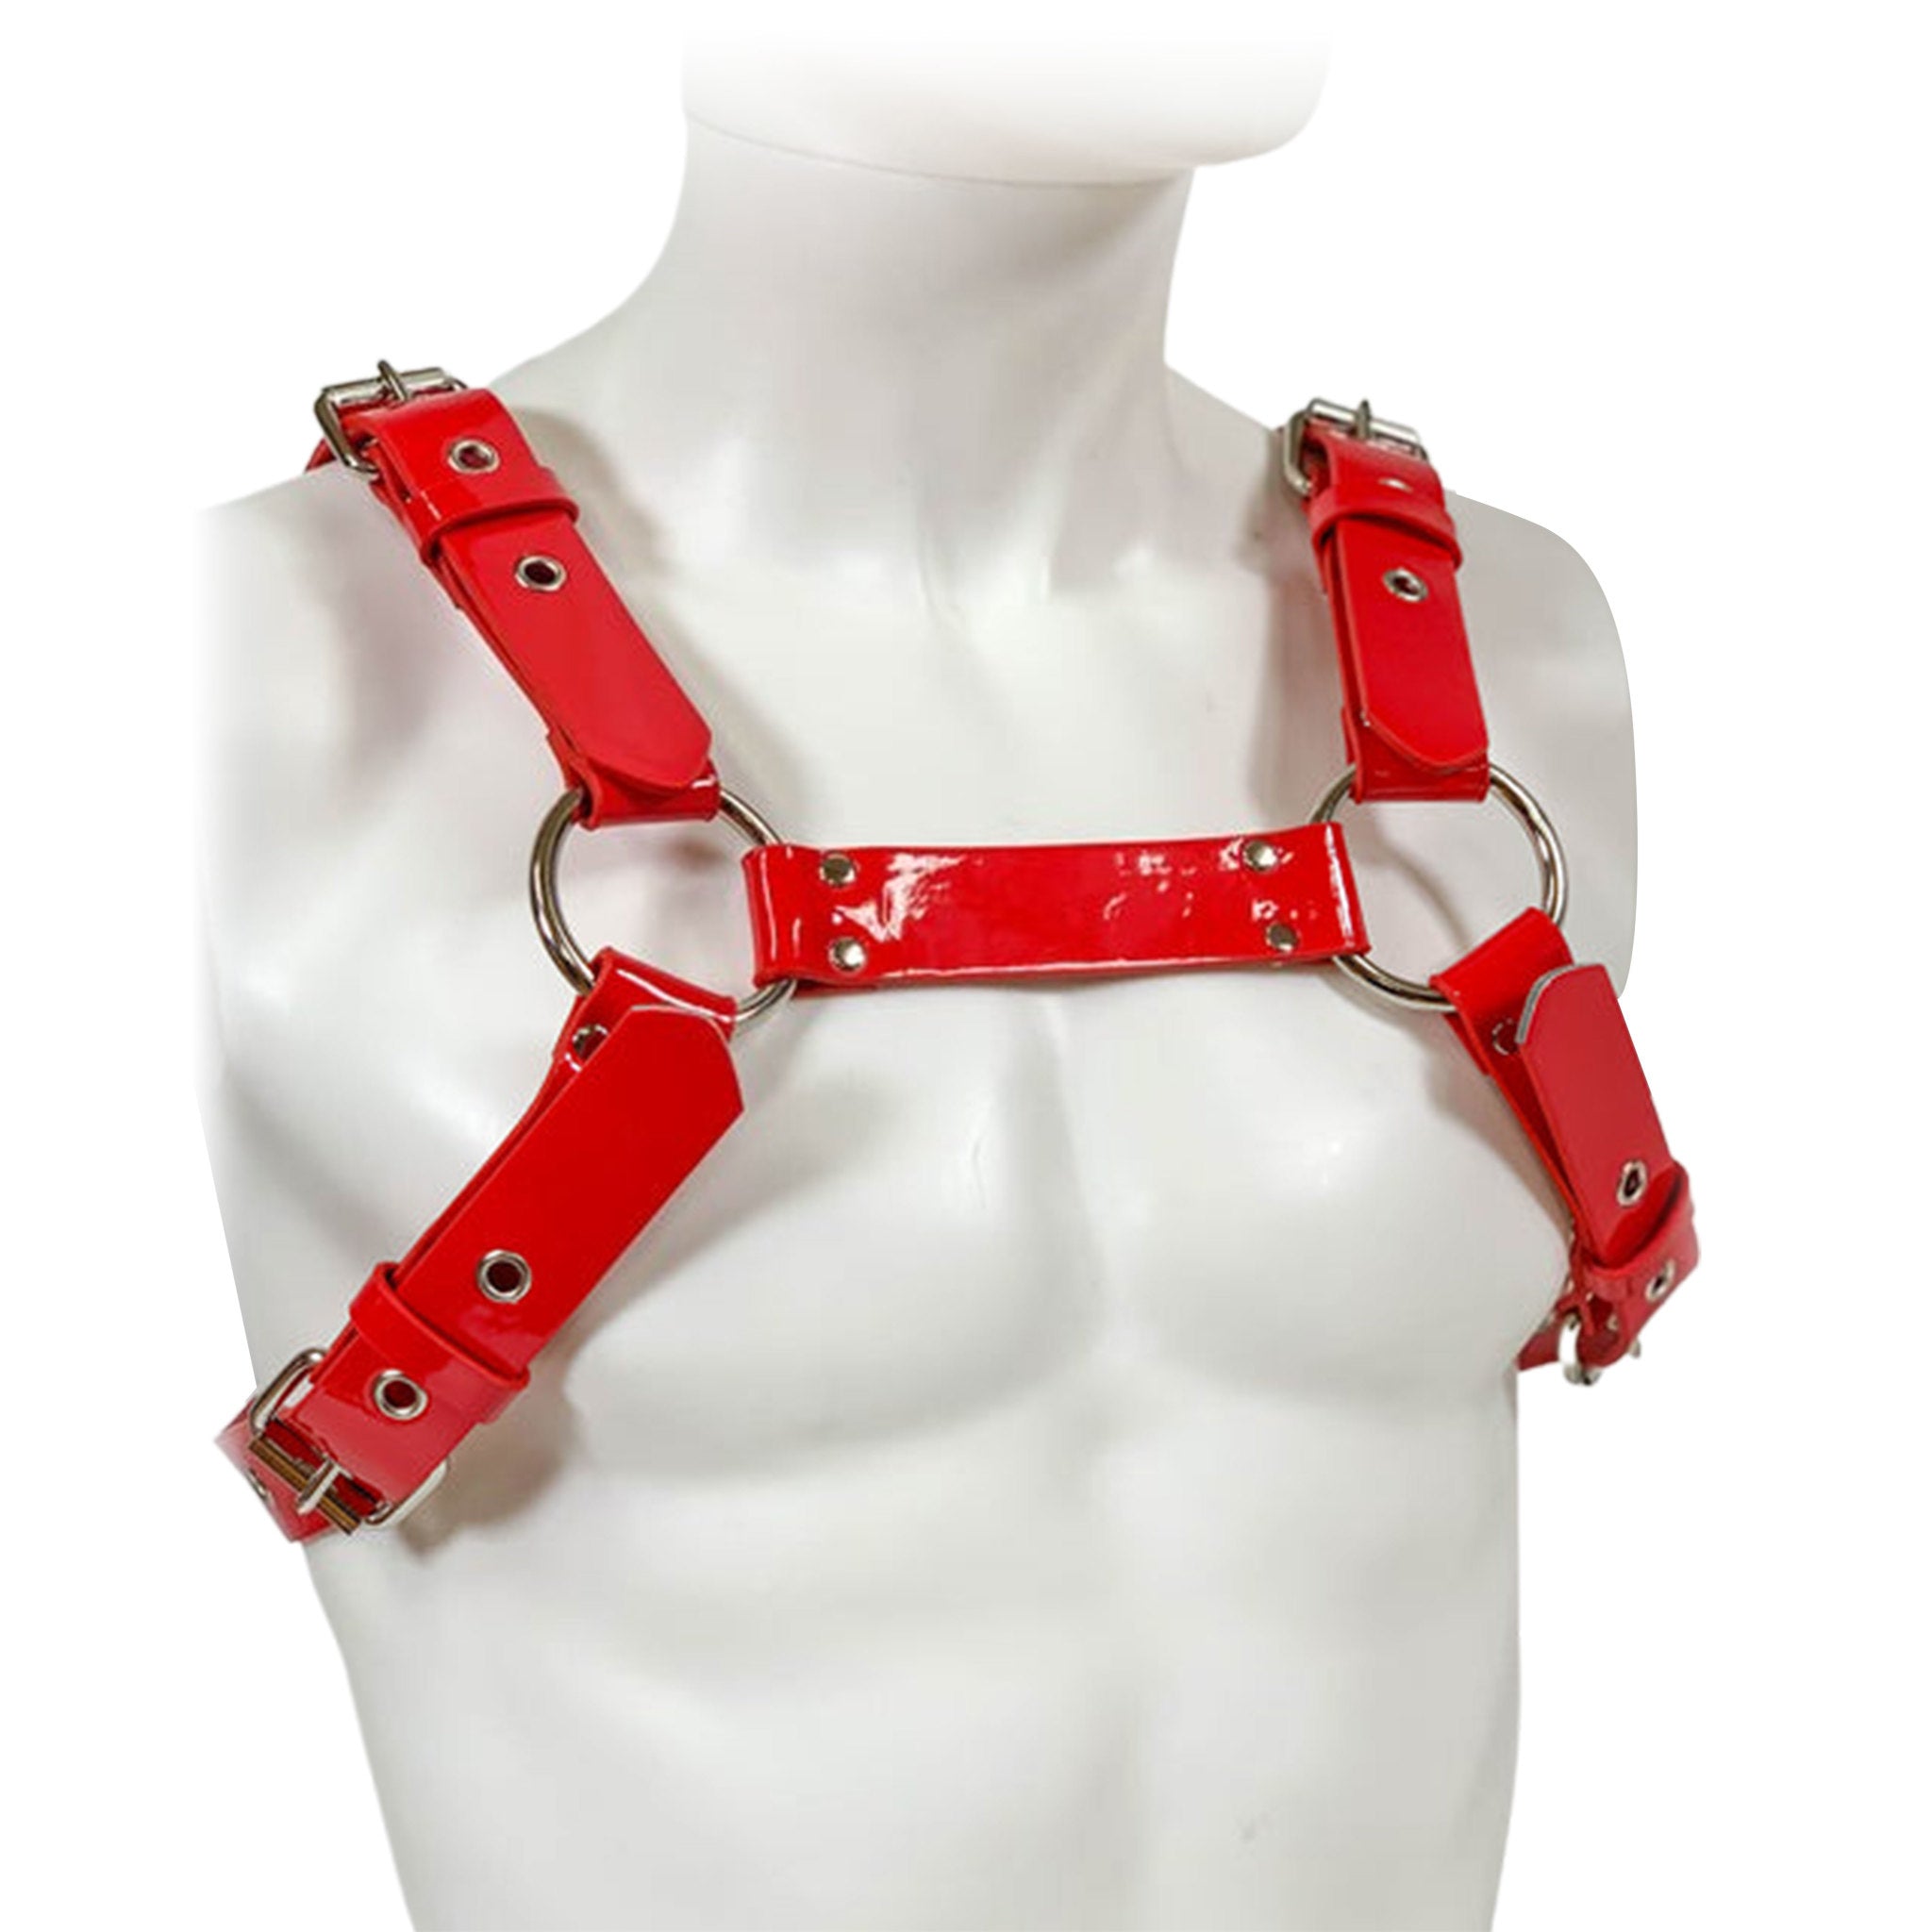 Bulldog Harness With O-rings And Buckles